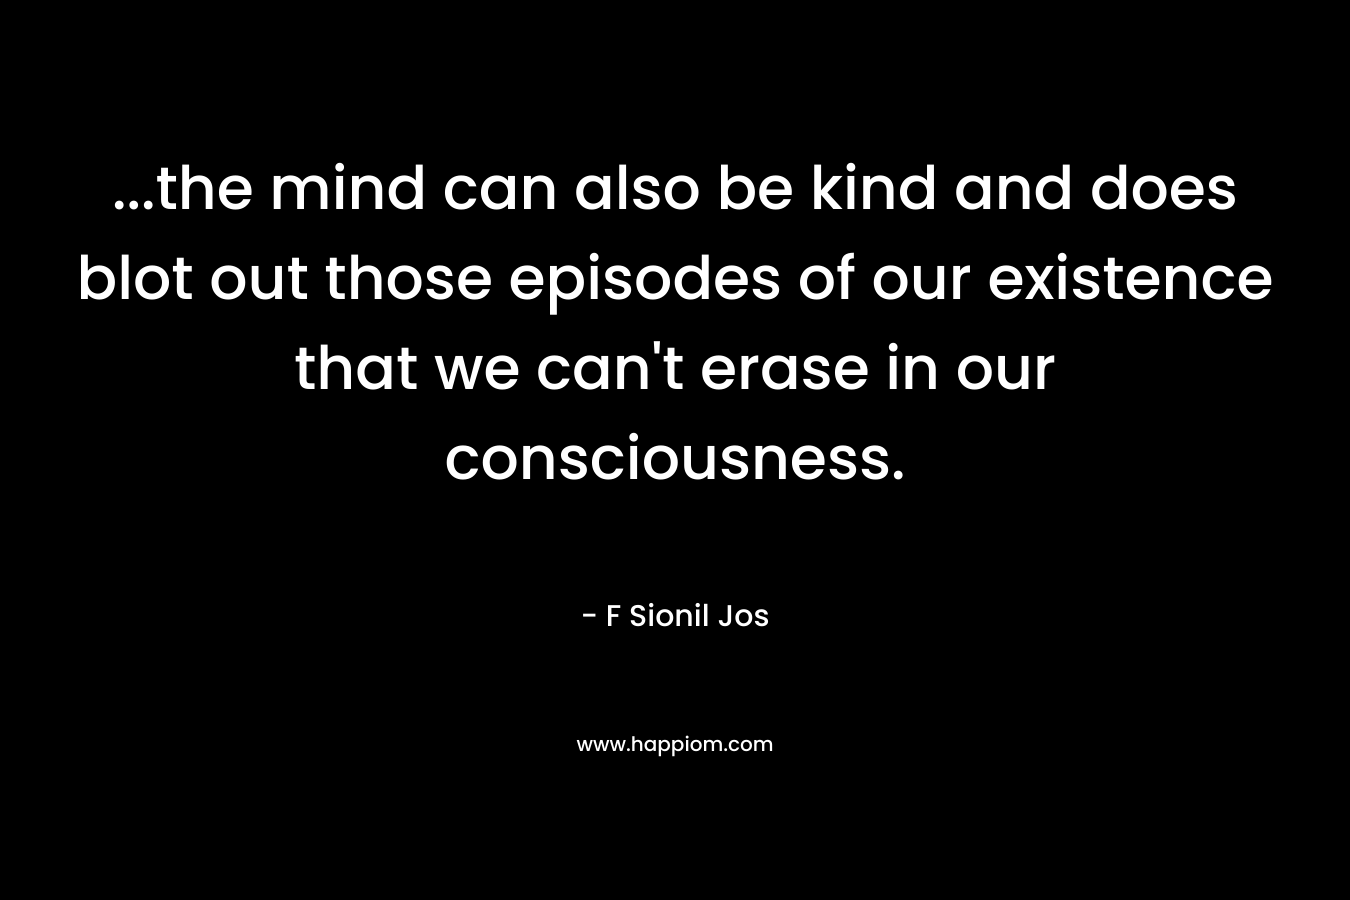 ...the mind can also be kind and does blot out those episodes of our existence that we can't erase in our consciousness.